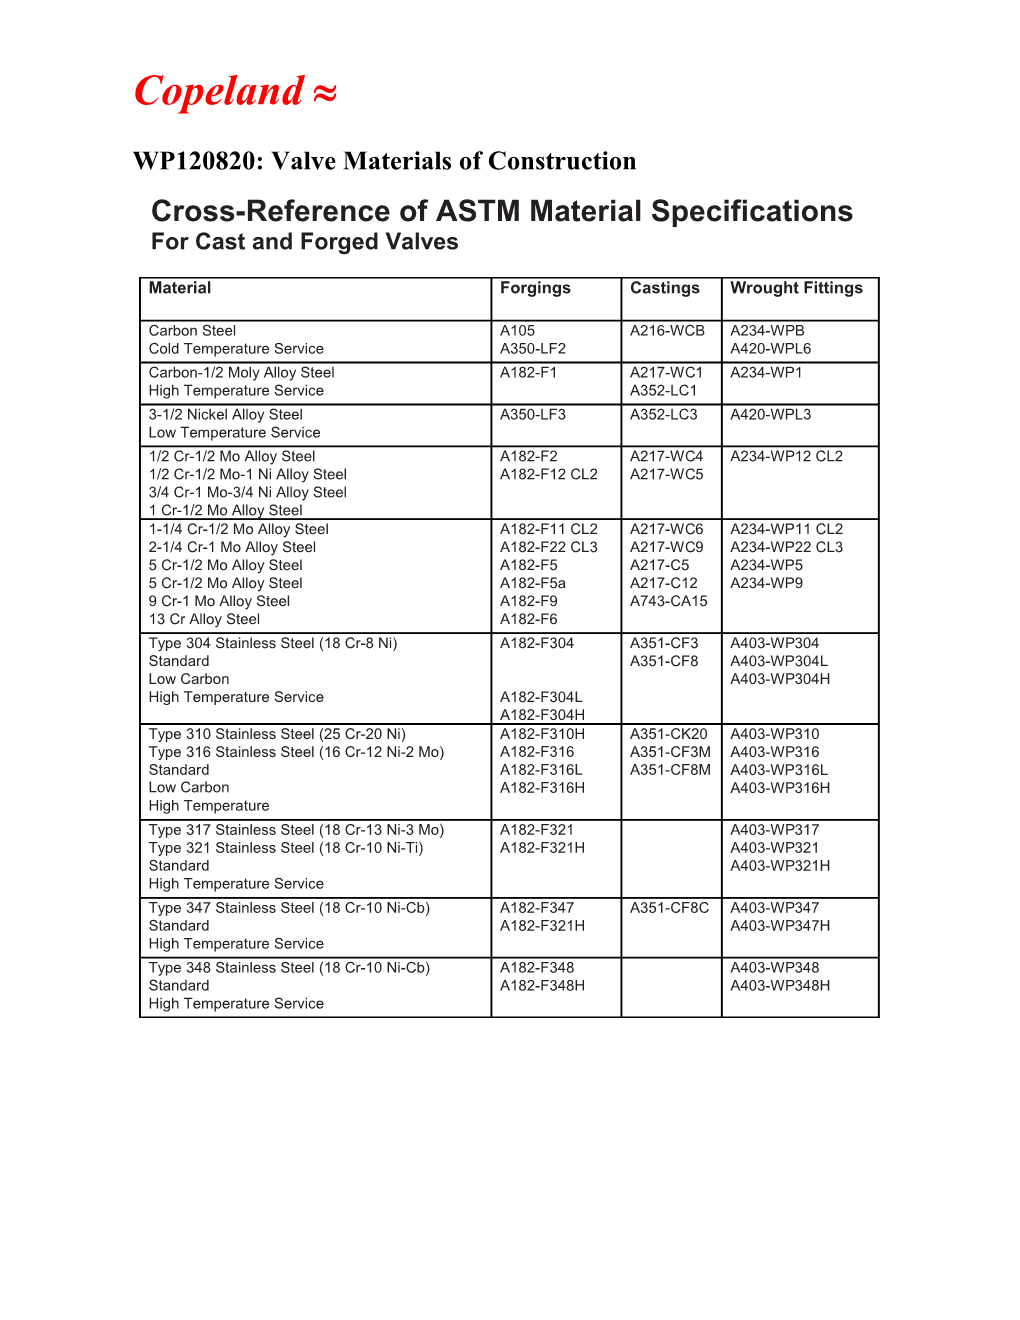 Cross-Reference Ofastm Material Specifications